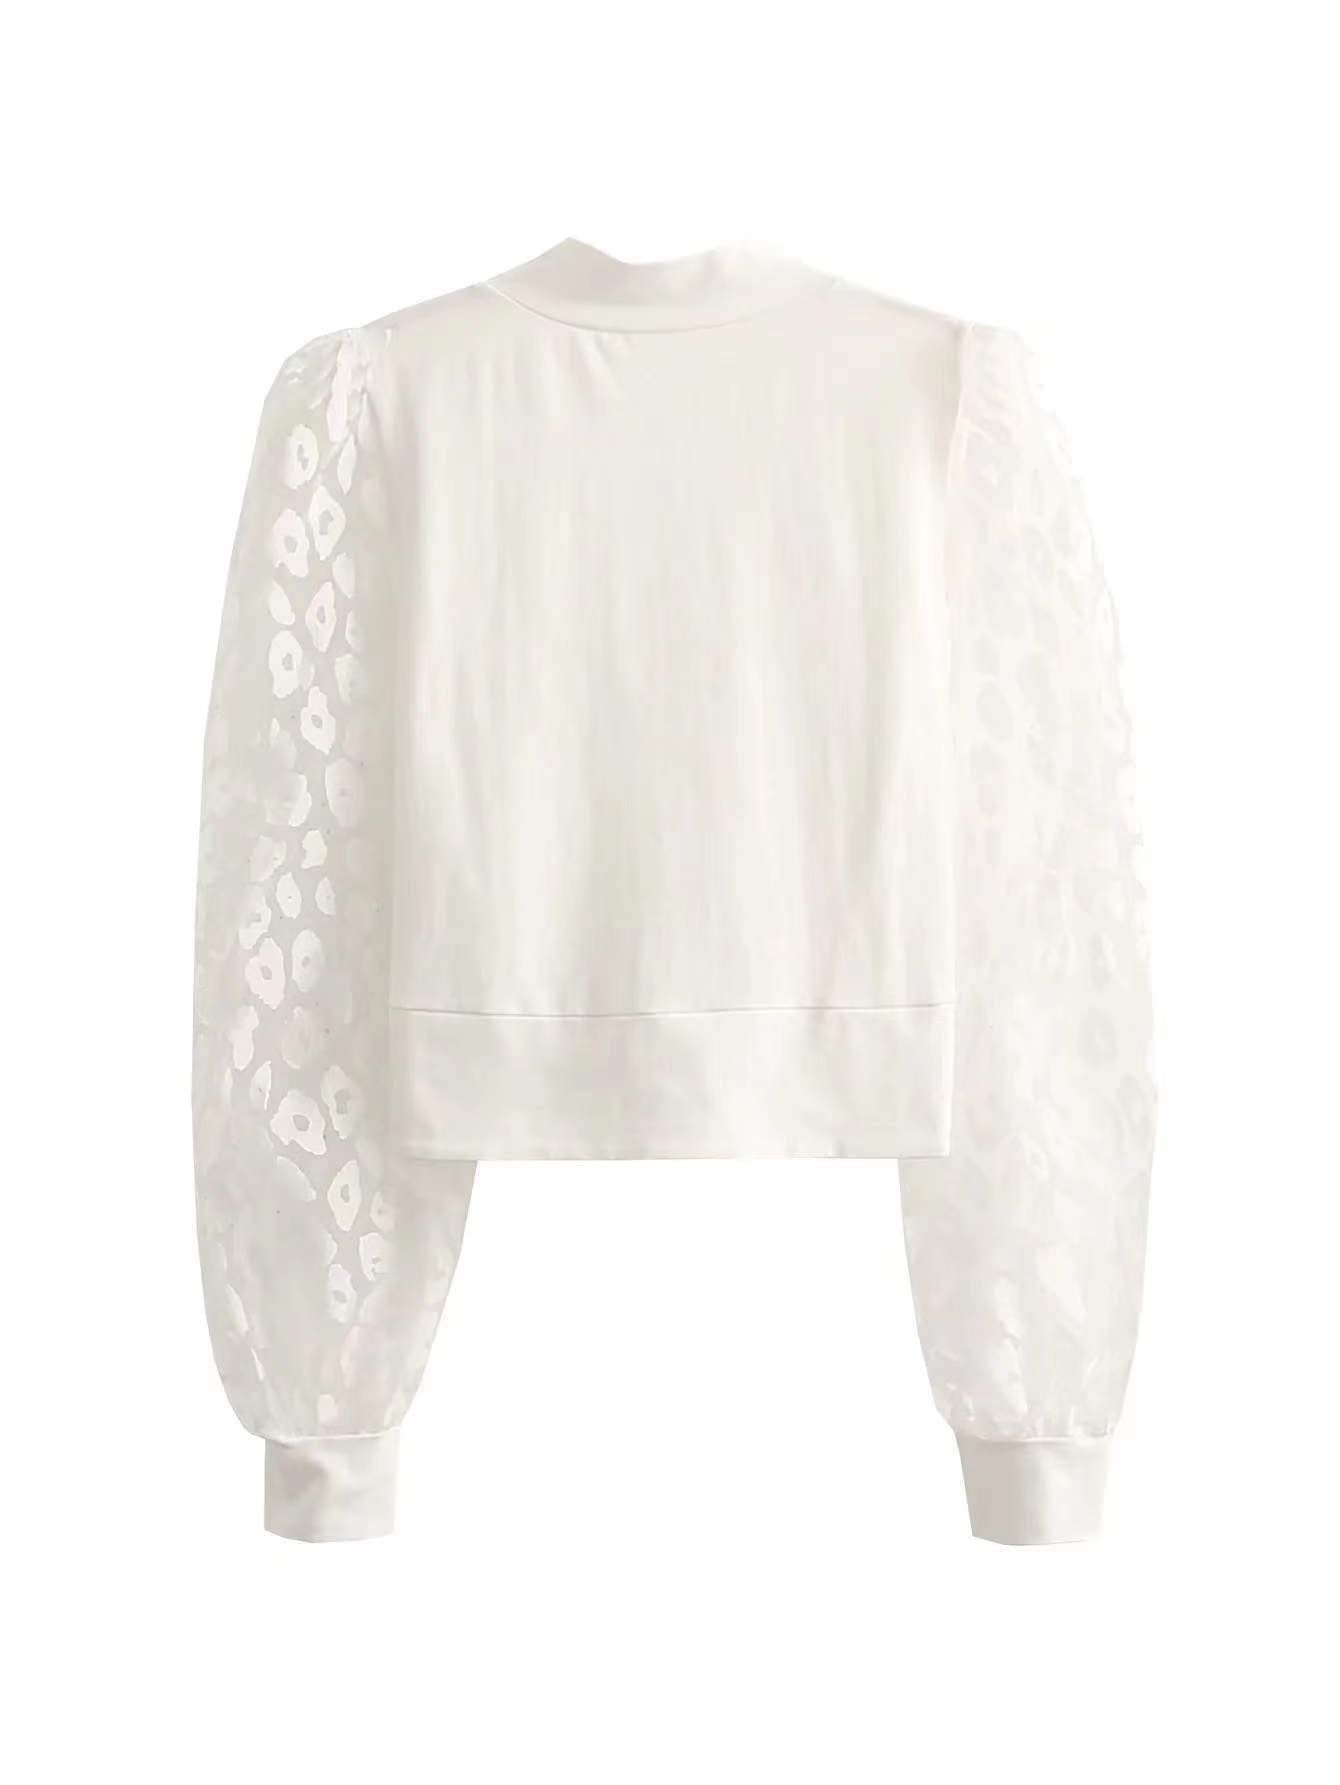 Casual Lace Women Top Blouses